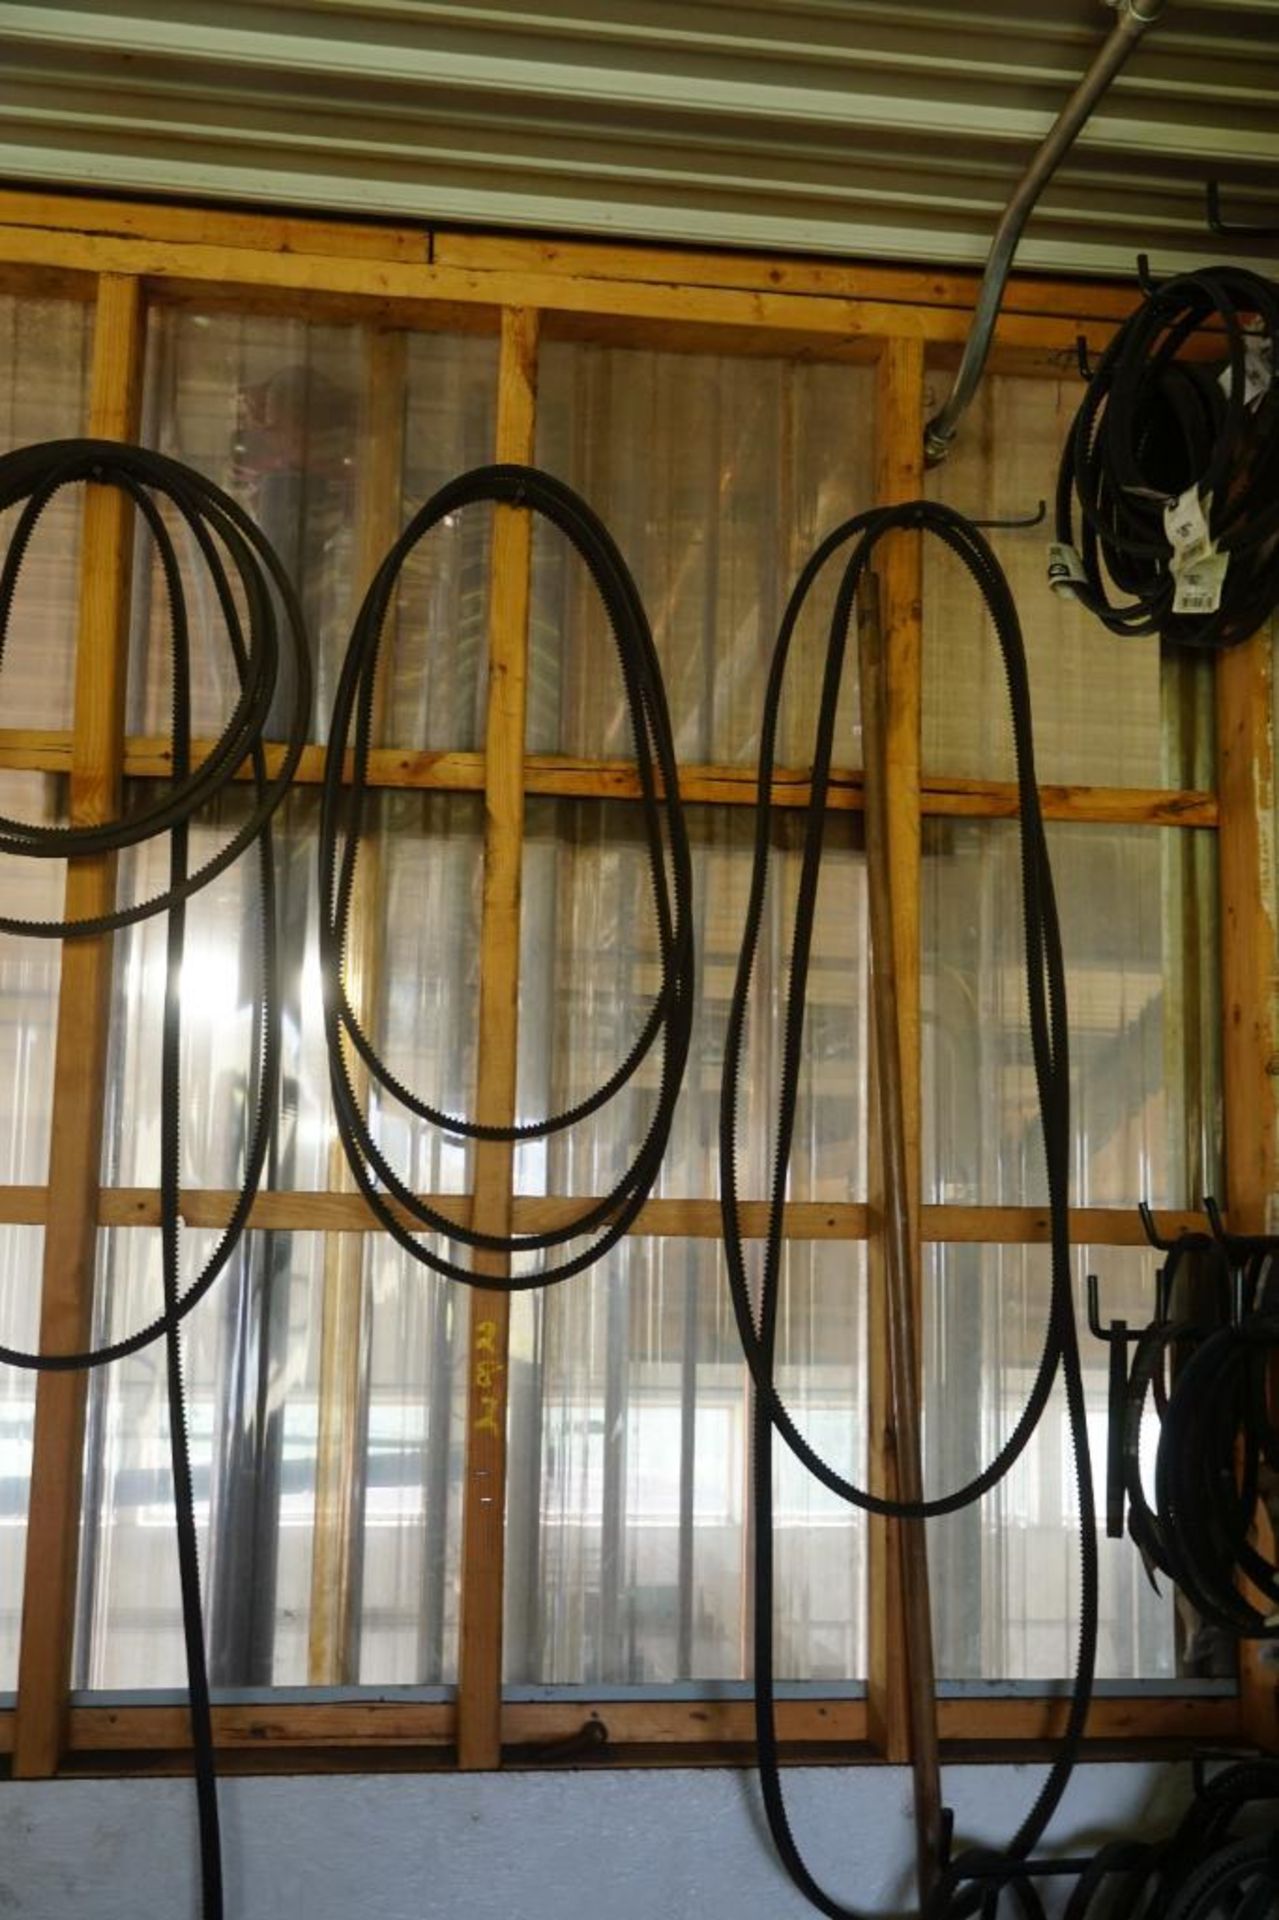 Copper Tubing and V Belts on Wall - Image 11 of 11